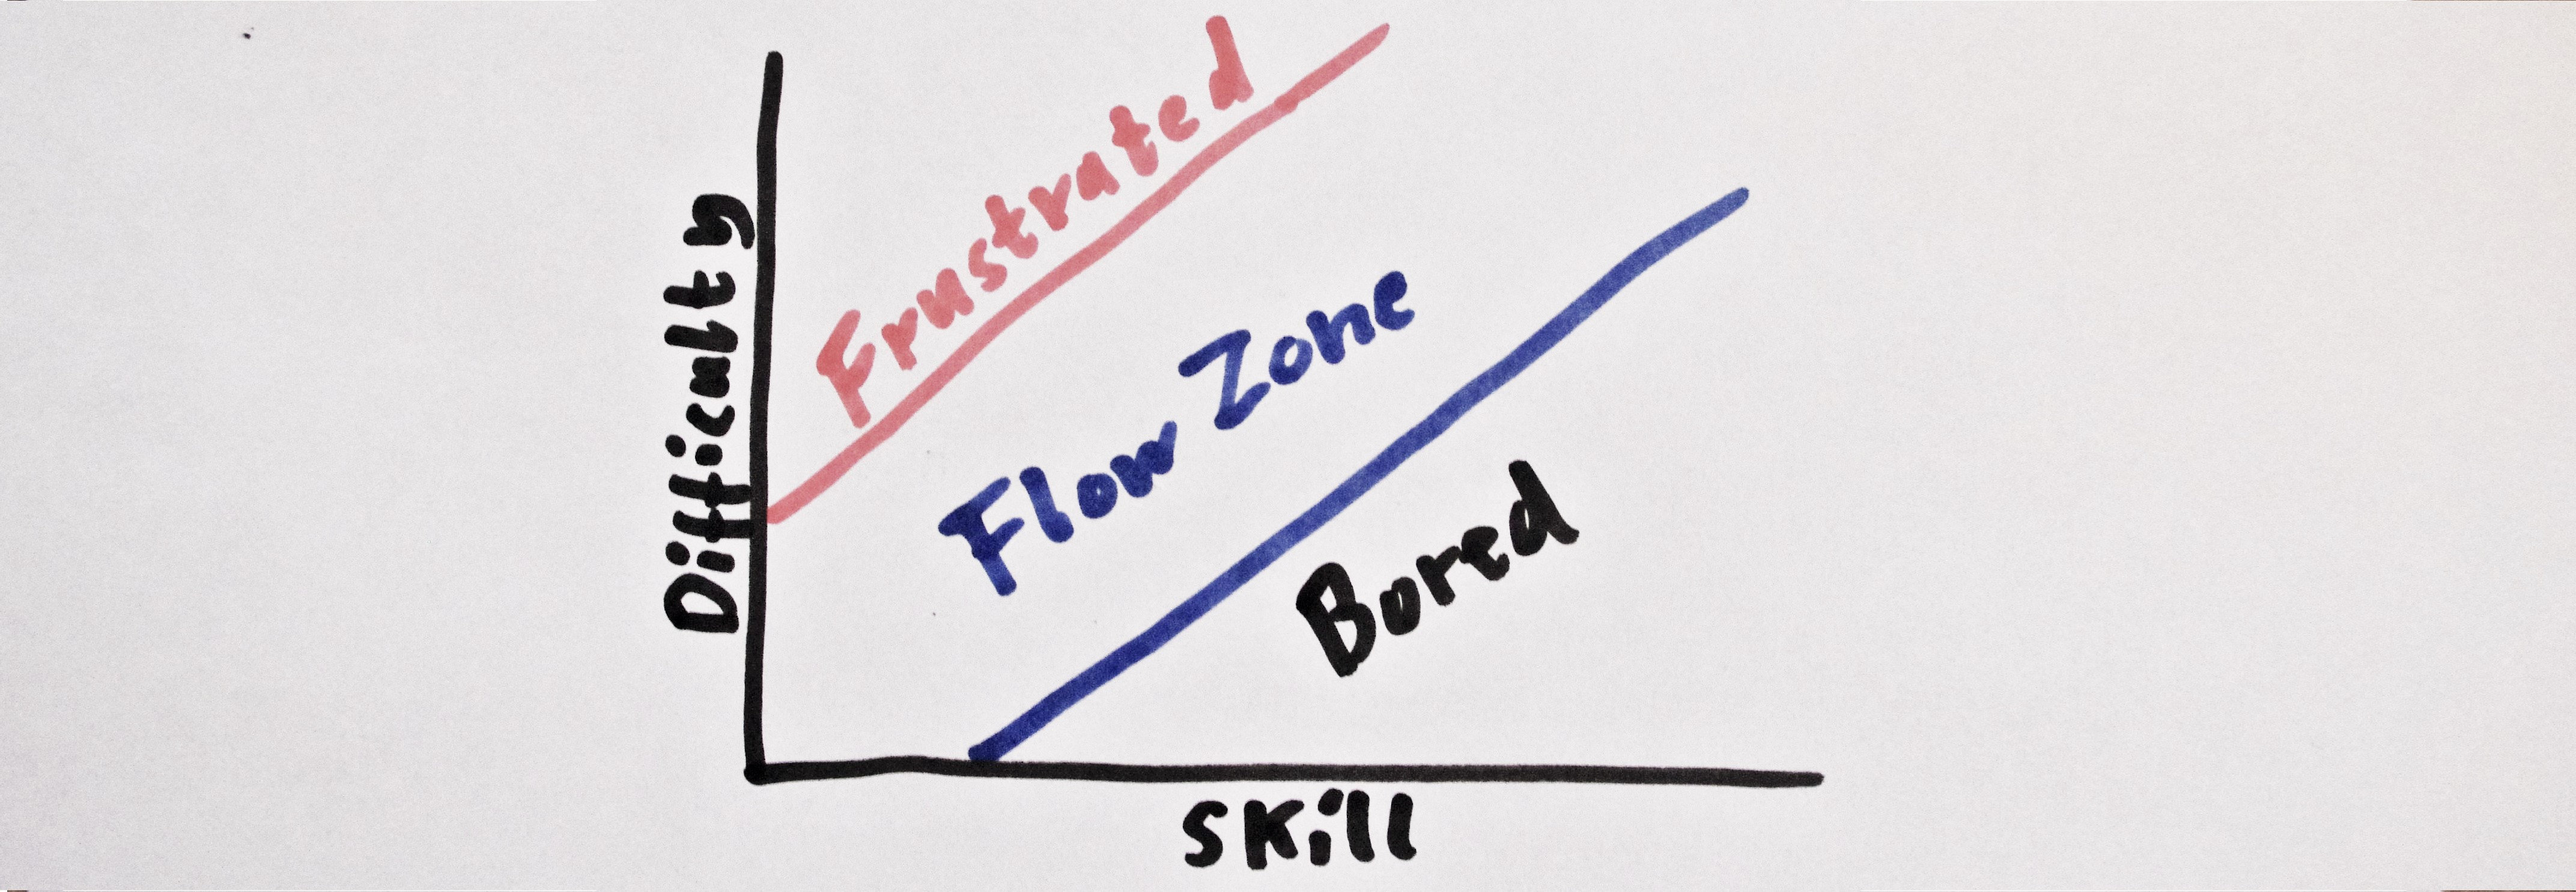 Graph illustrating Flow Zone Product Experience by Mihaly Csikszentmihalyi.